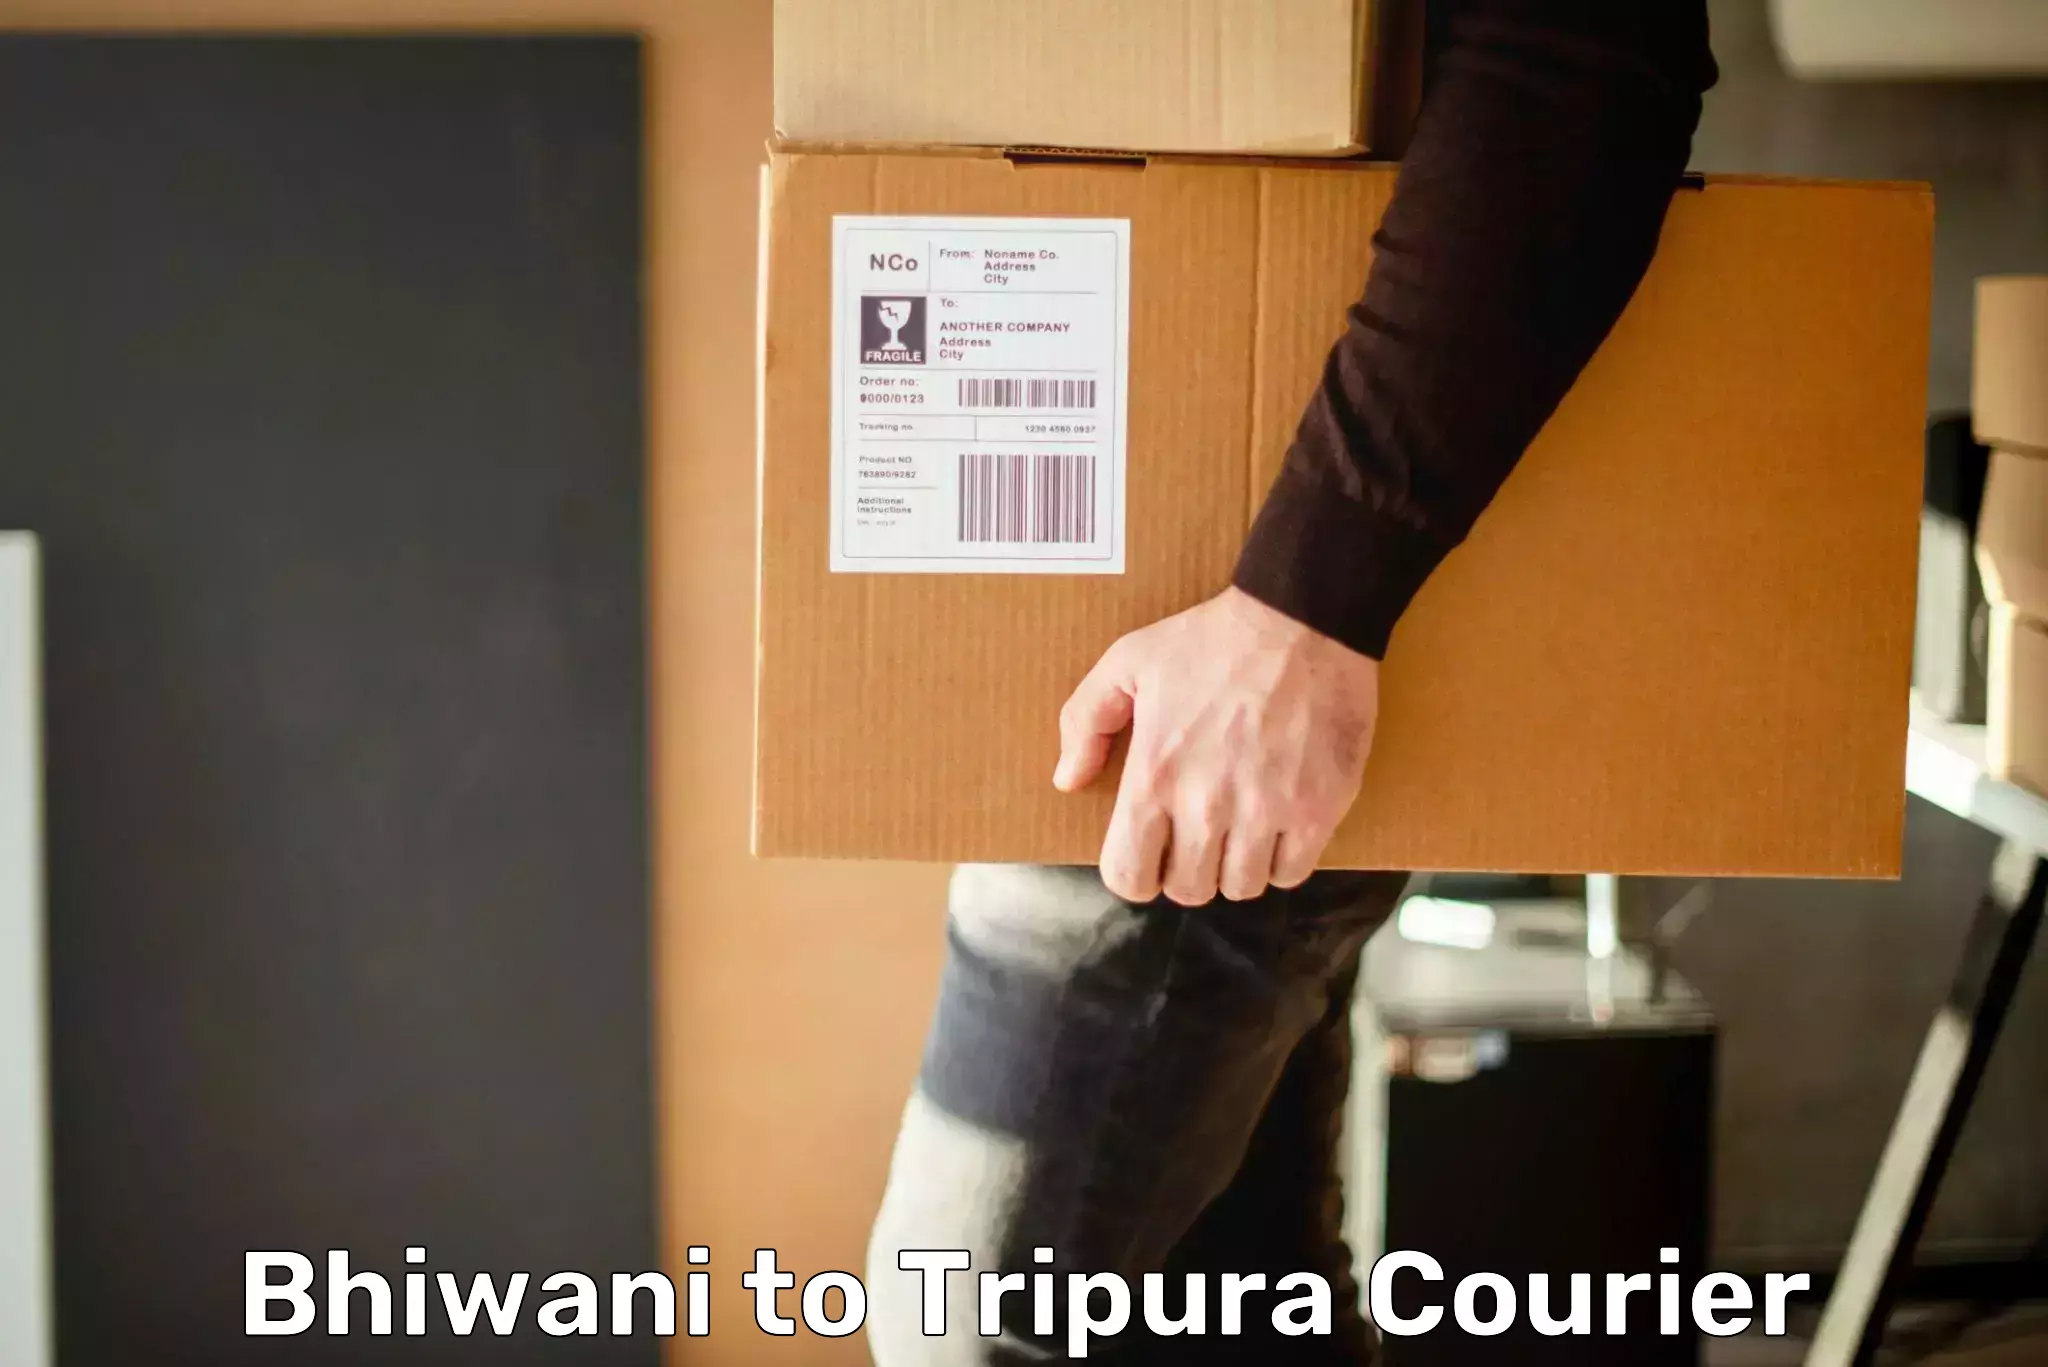 Fast delivery service Bhiwani to Tripura